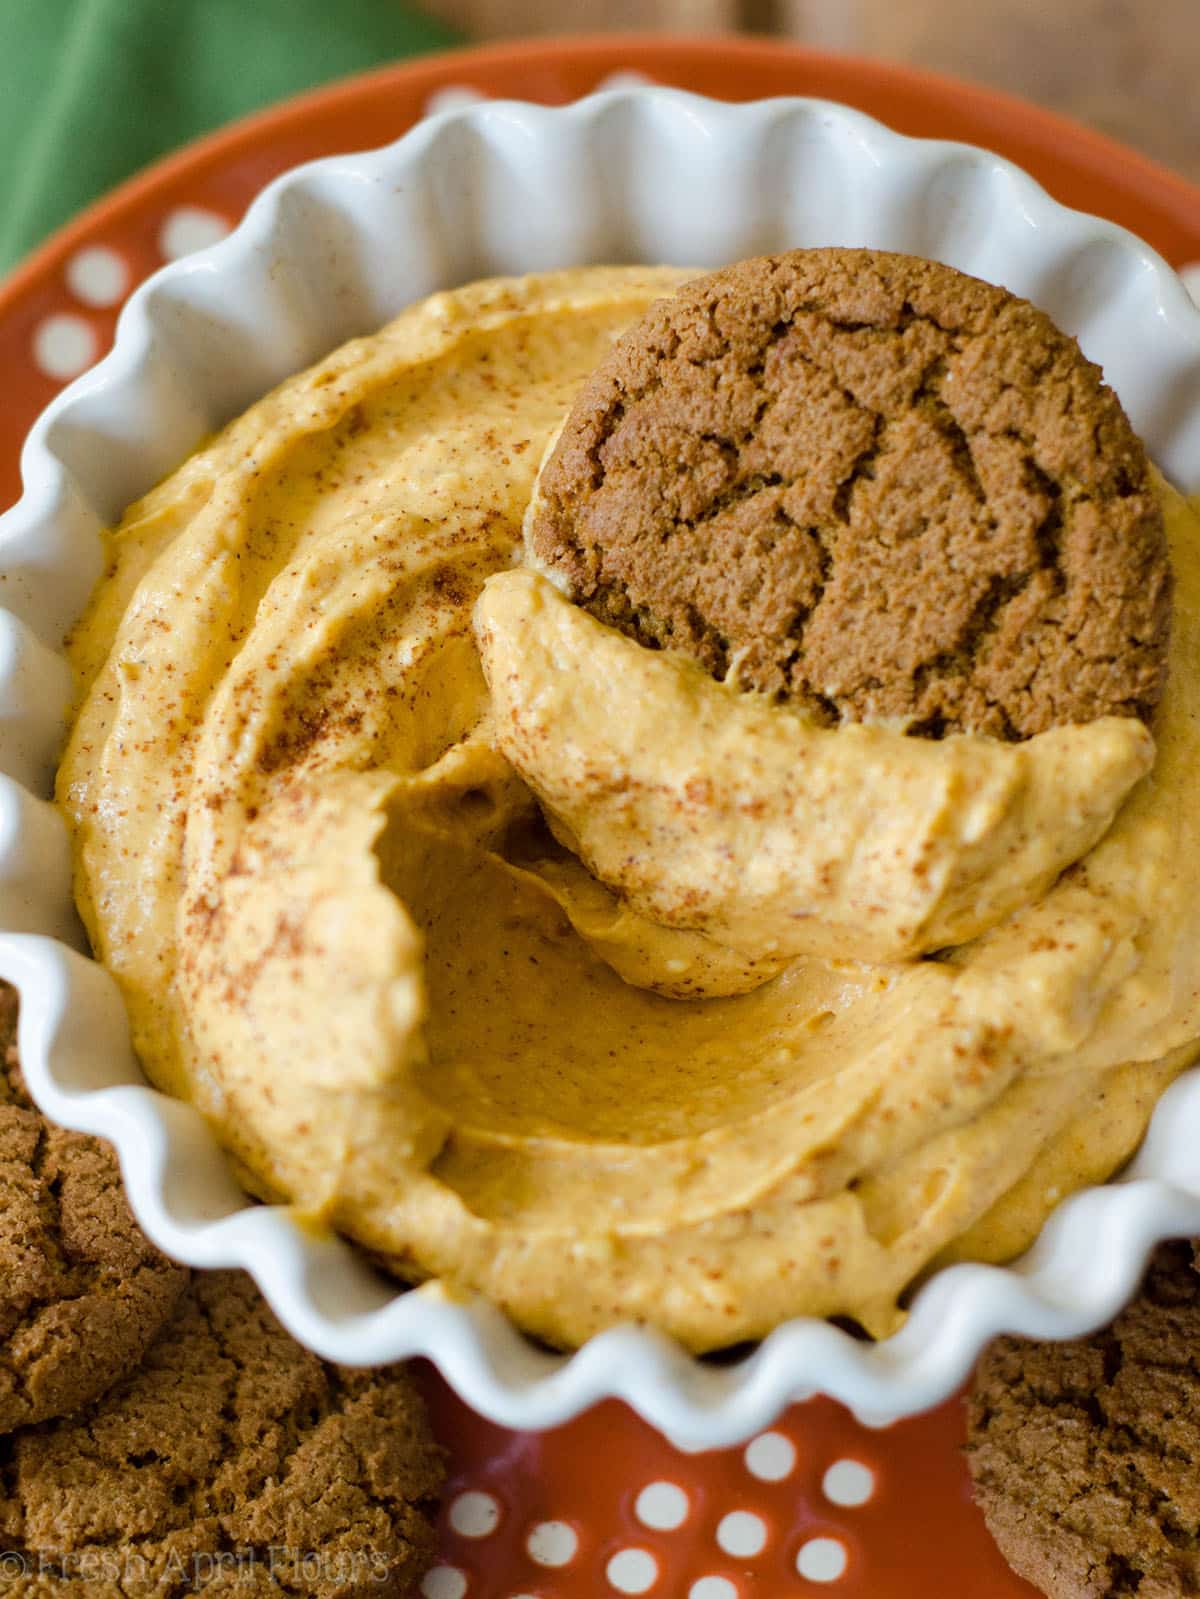 Pumpkin Dip: Creamy, spicy pumpkin dip sweetened with a touch of brown sugar, perfect for dipping cookies, apples, and graham crackers.